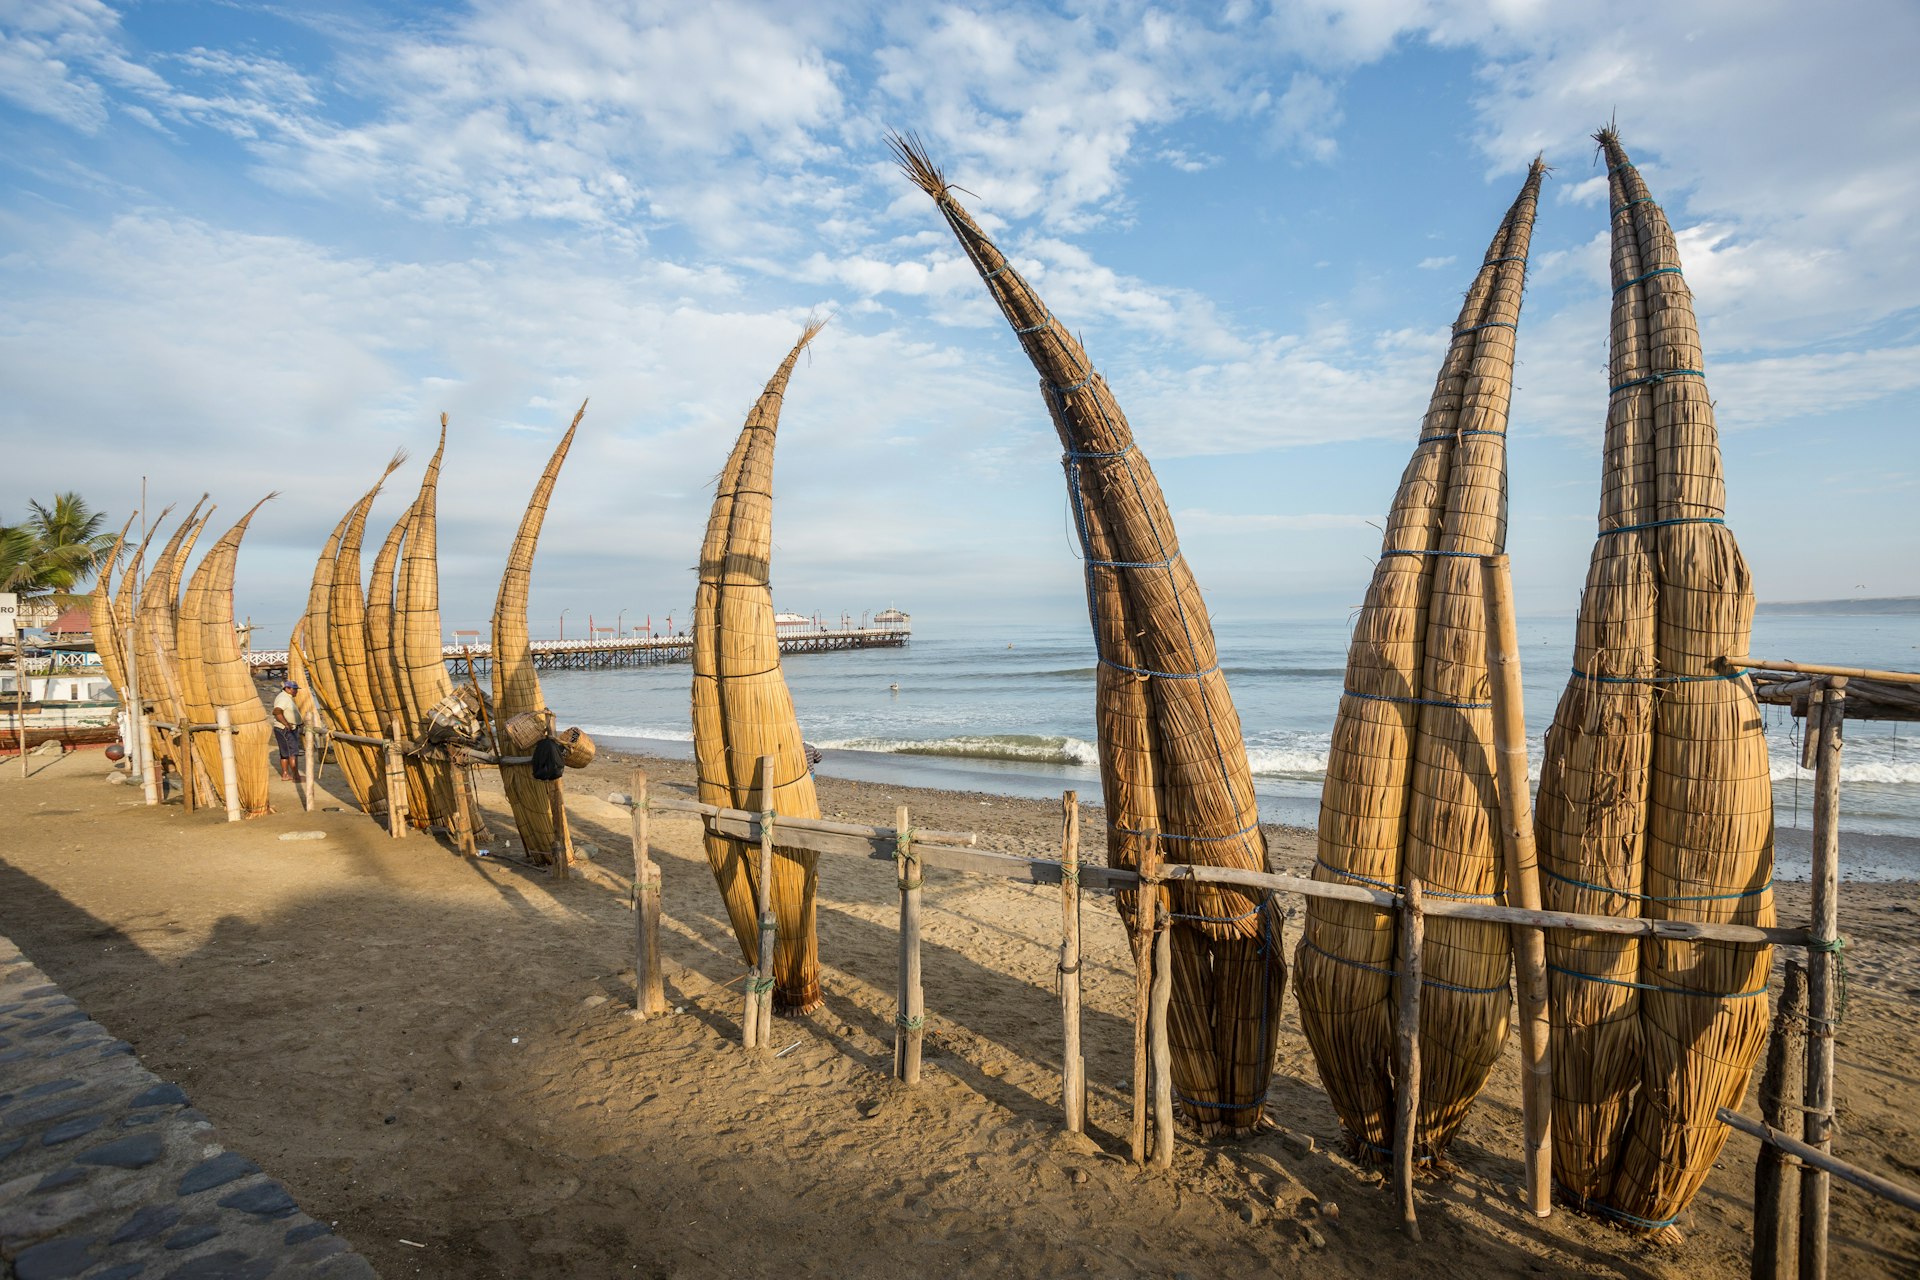 Reed boats stand on end along the sand in Huanchaco, Peru